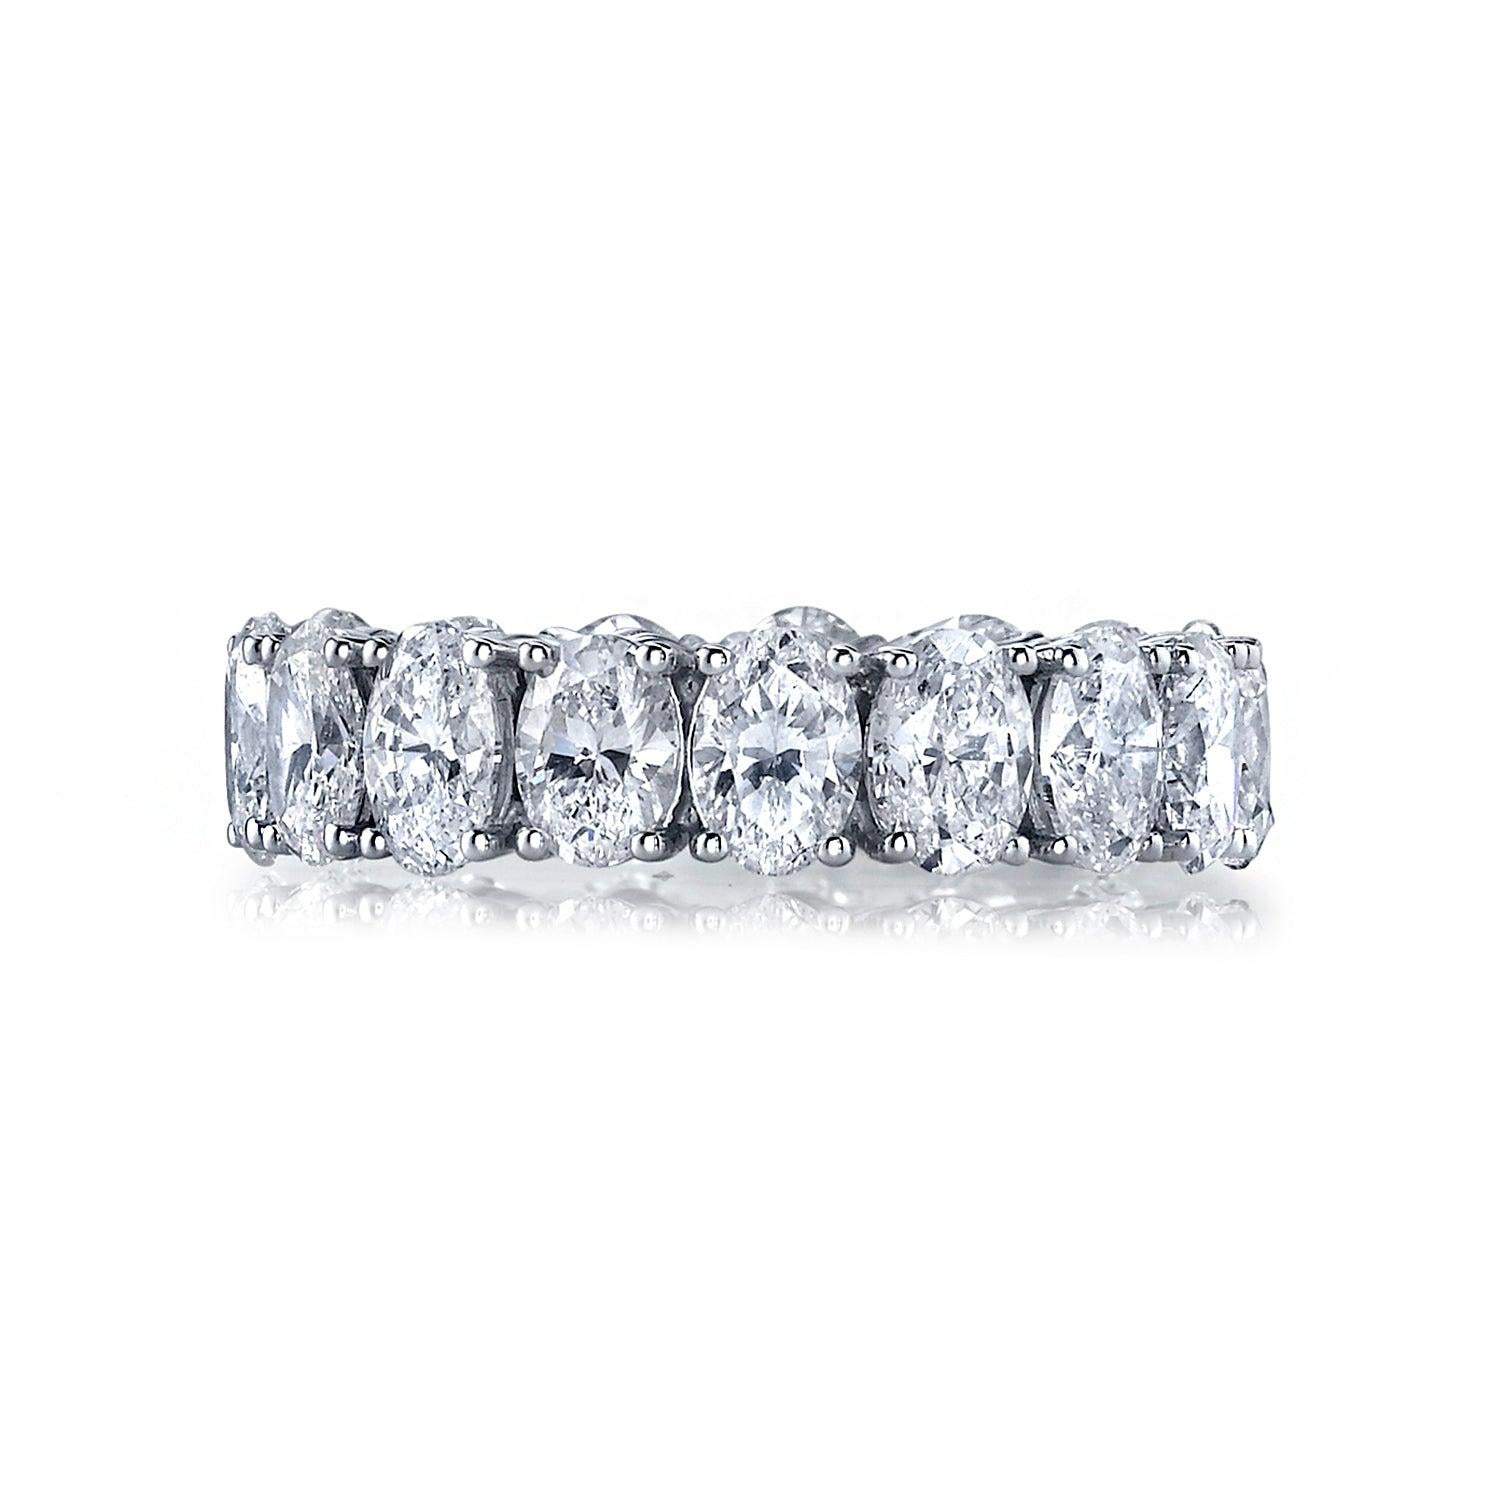 Up your style game with our Oval Diamond Cut Eternity Band! Featuring 19 radiant diamonds and a buttercup-adorned platinum band.  
Oval Diamond Cut Eternity Band.
This ring is created with 19 diamonds that total 3.80 carats. 
Their color is G/H with